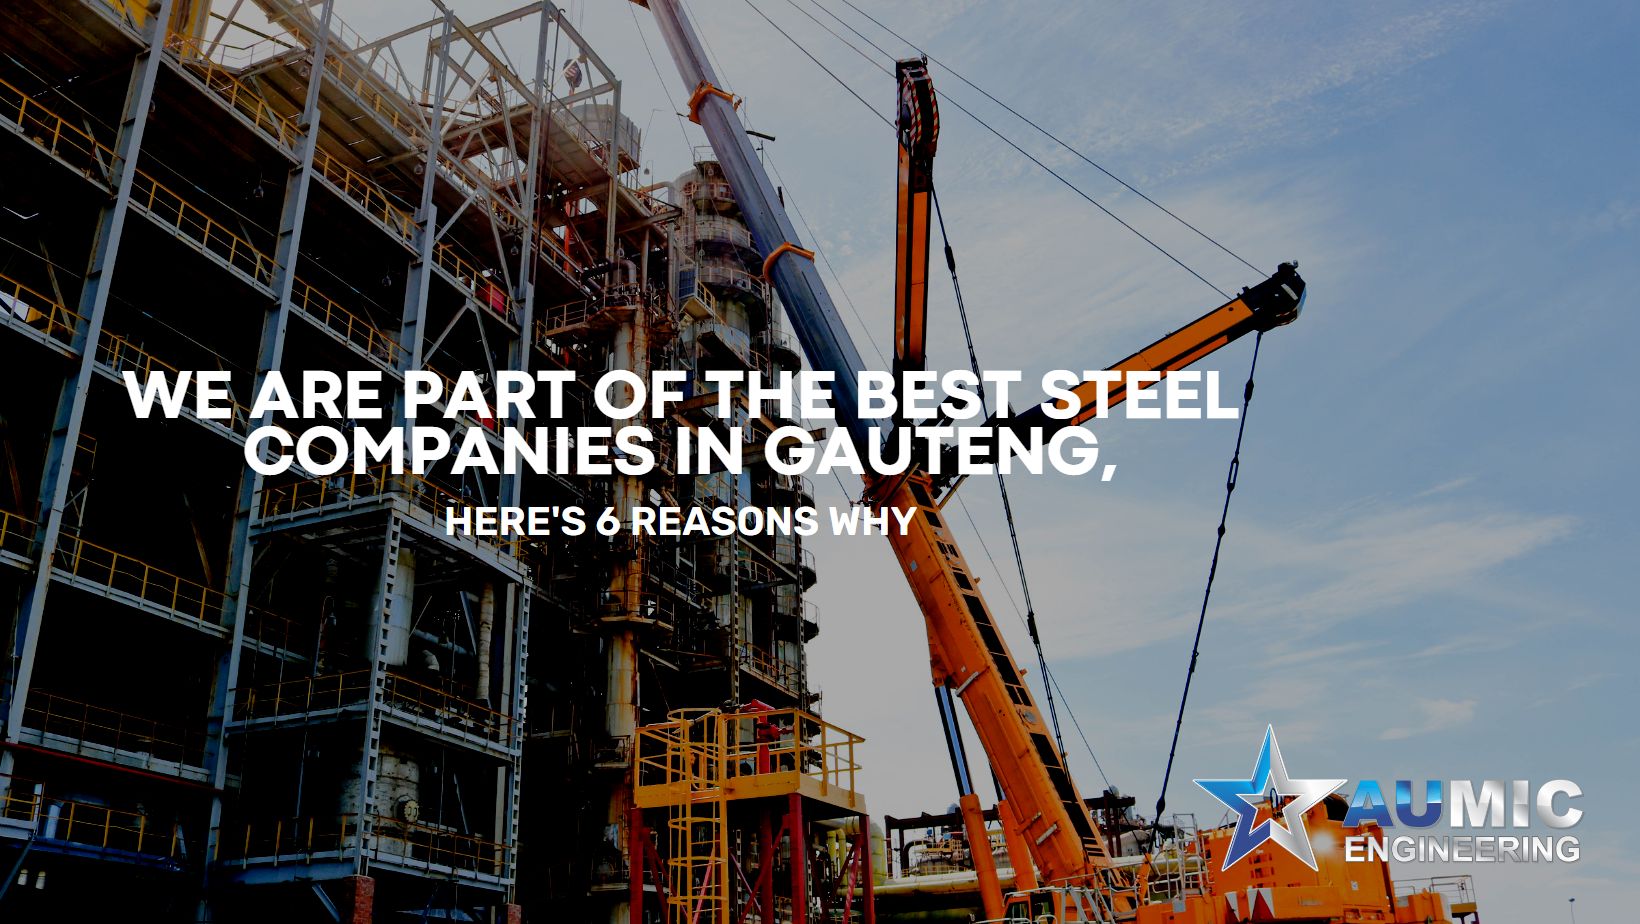 This article provides 6 reasons why Aumic Engineering is one of the best steel companies in Gauteng.